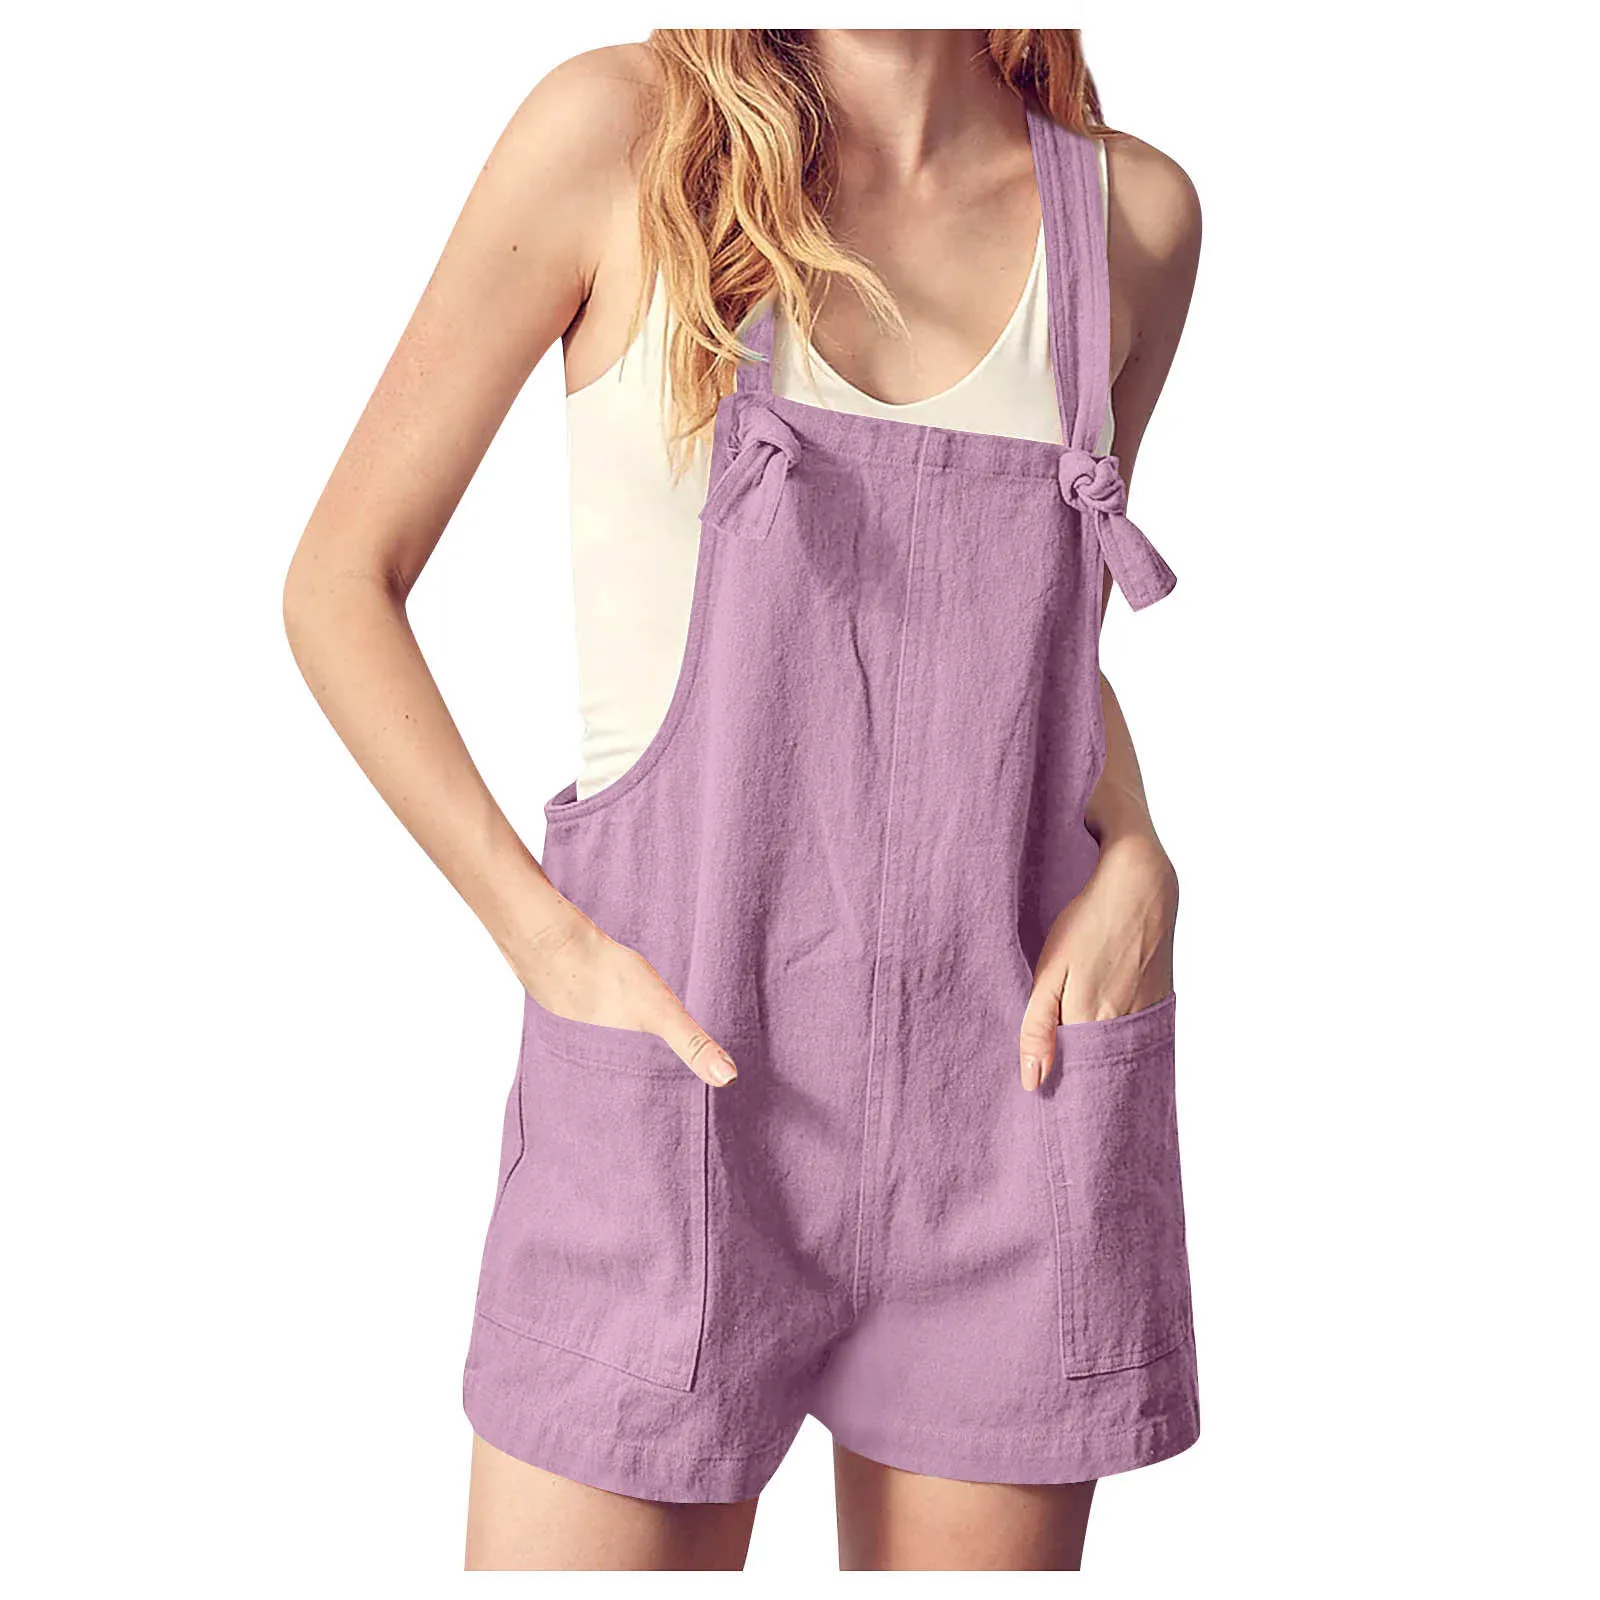 Fashion Women's Jumpsuits Summer New Casual Bib Loose Sleeveless Rompers Female Patchwork Button Short Playsuits Cotton And Hemp